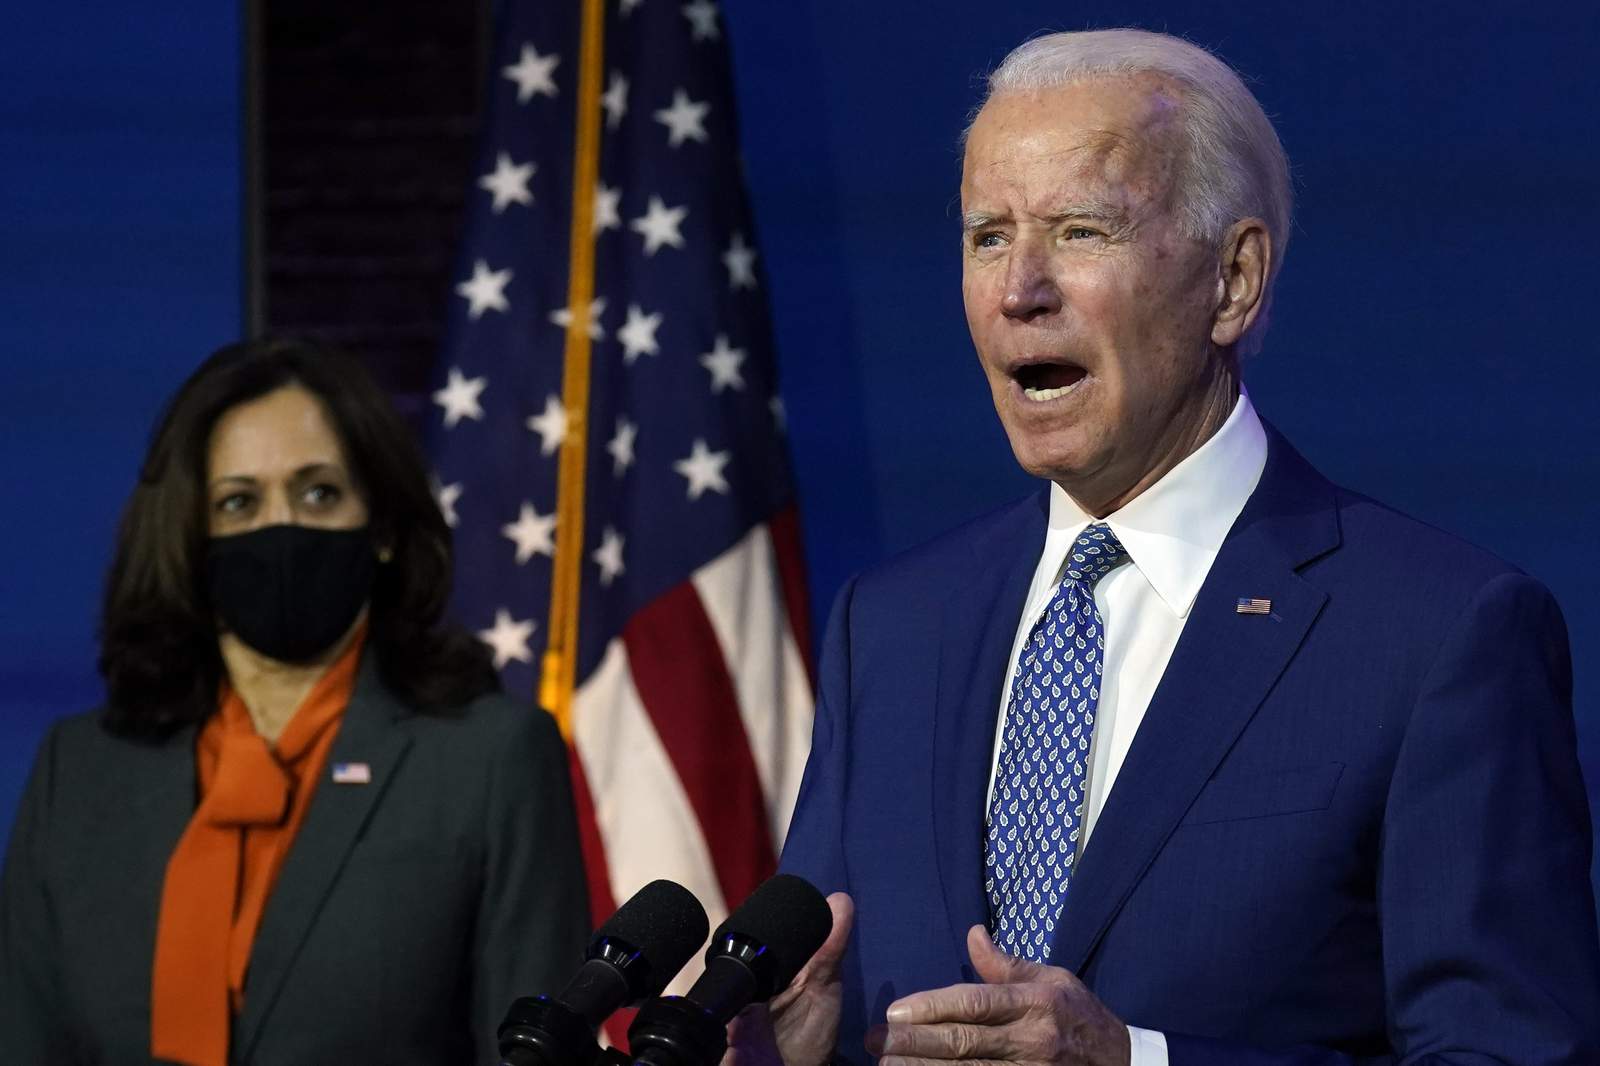 Live stream: Biden delivers remarks on the economy